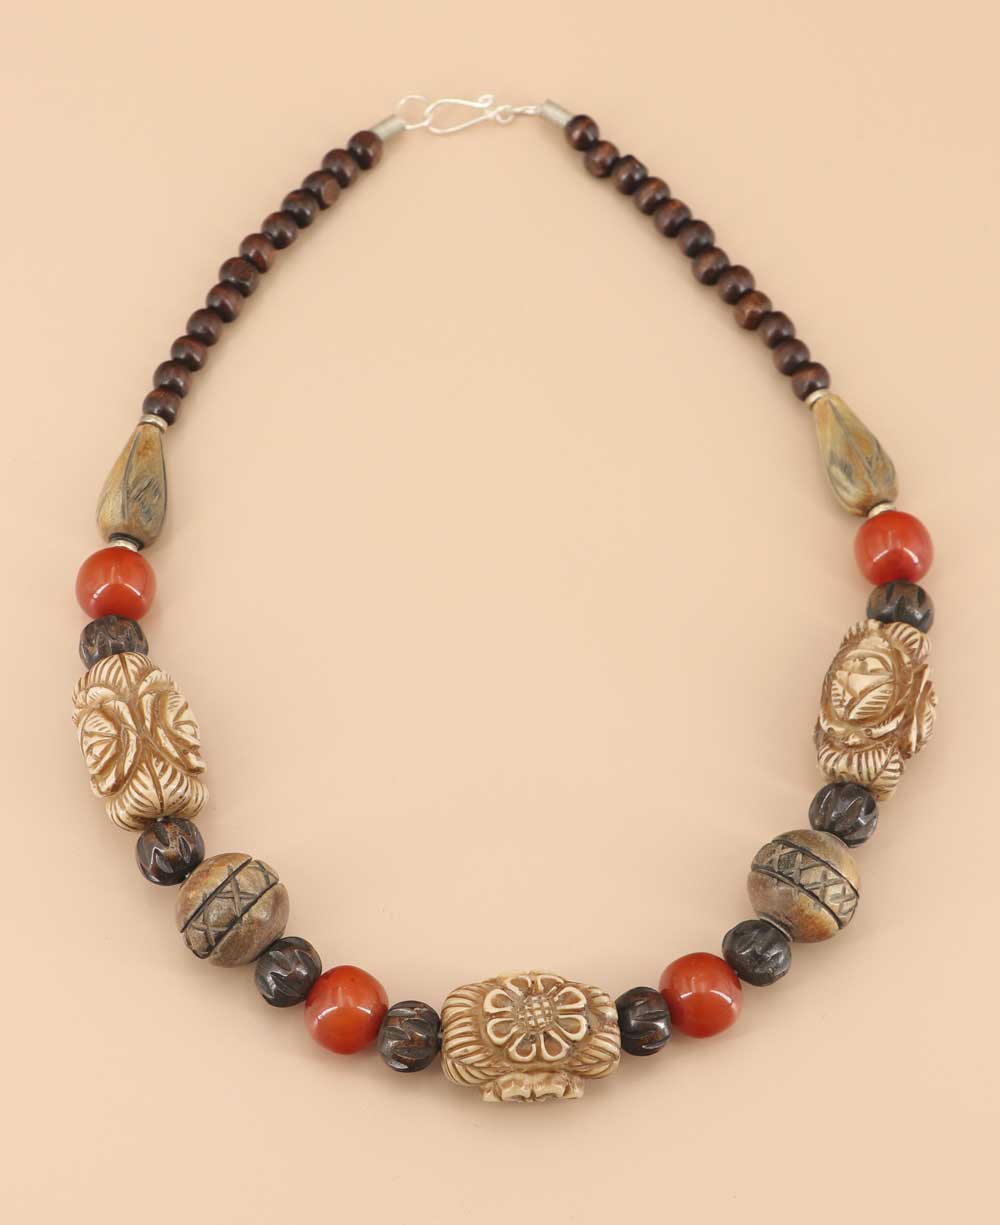 Gemstone Necklaces, Ethnic Necklaces, and Beaded Necklaces